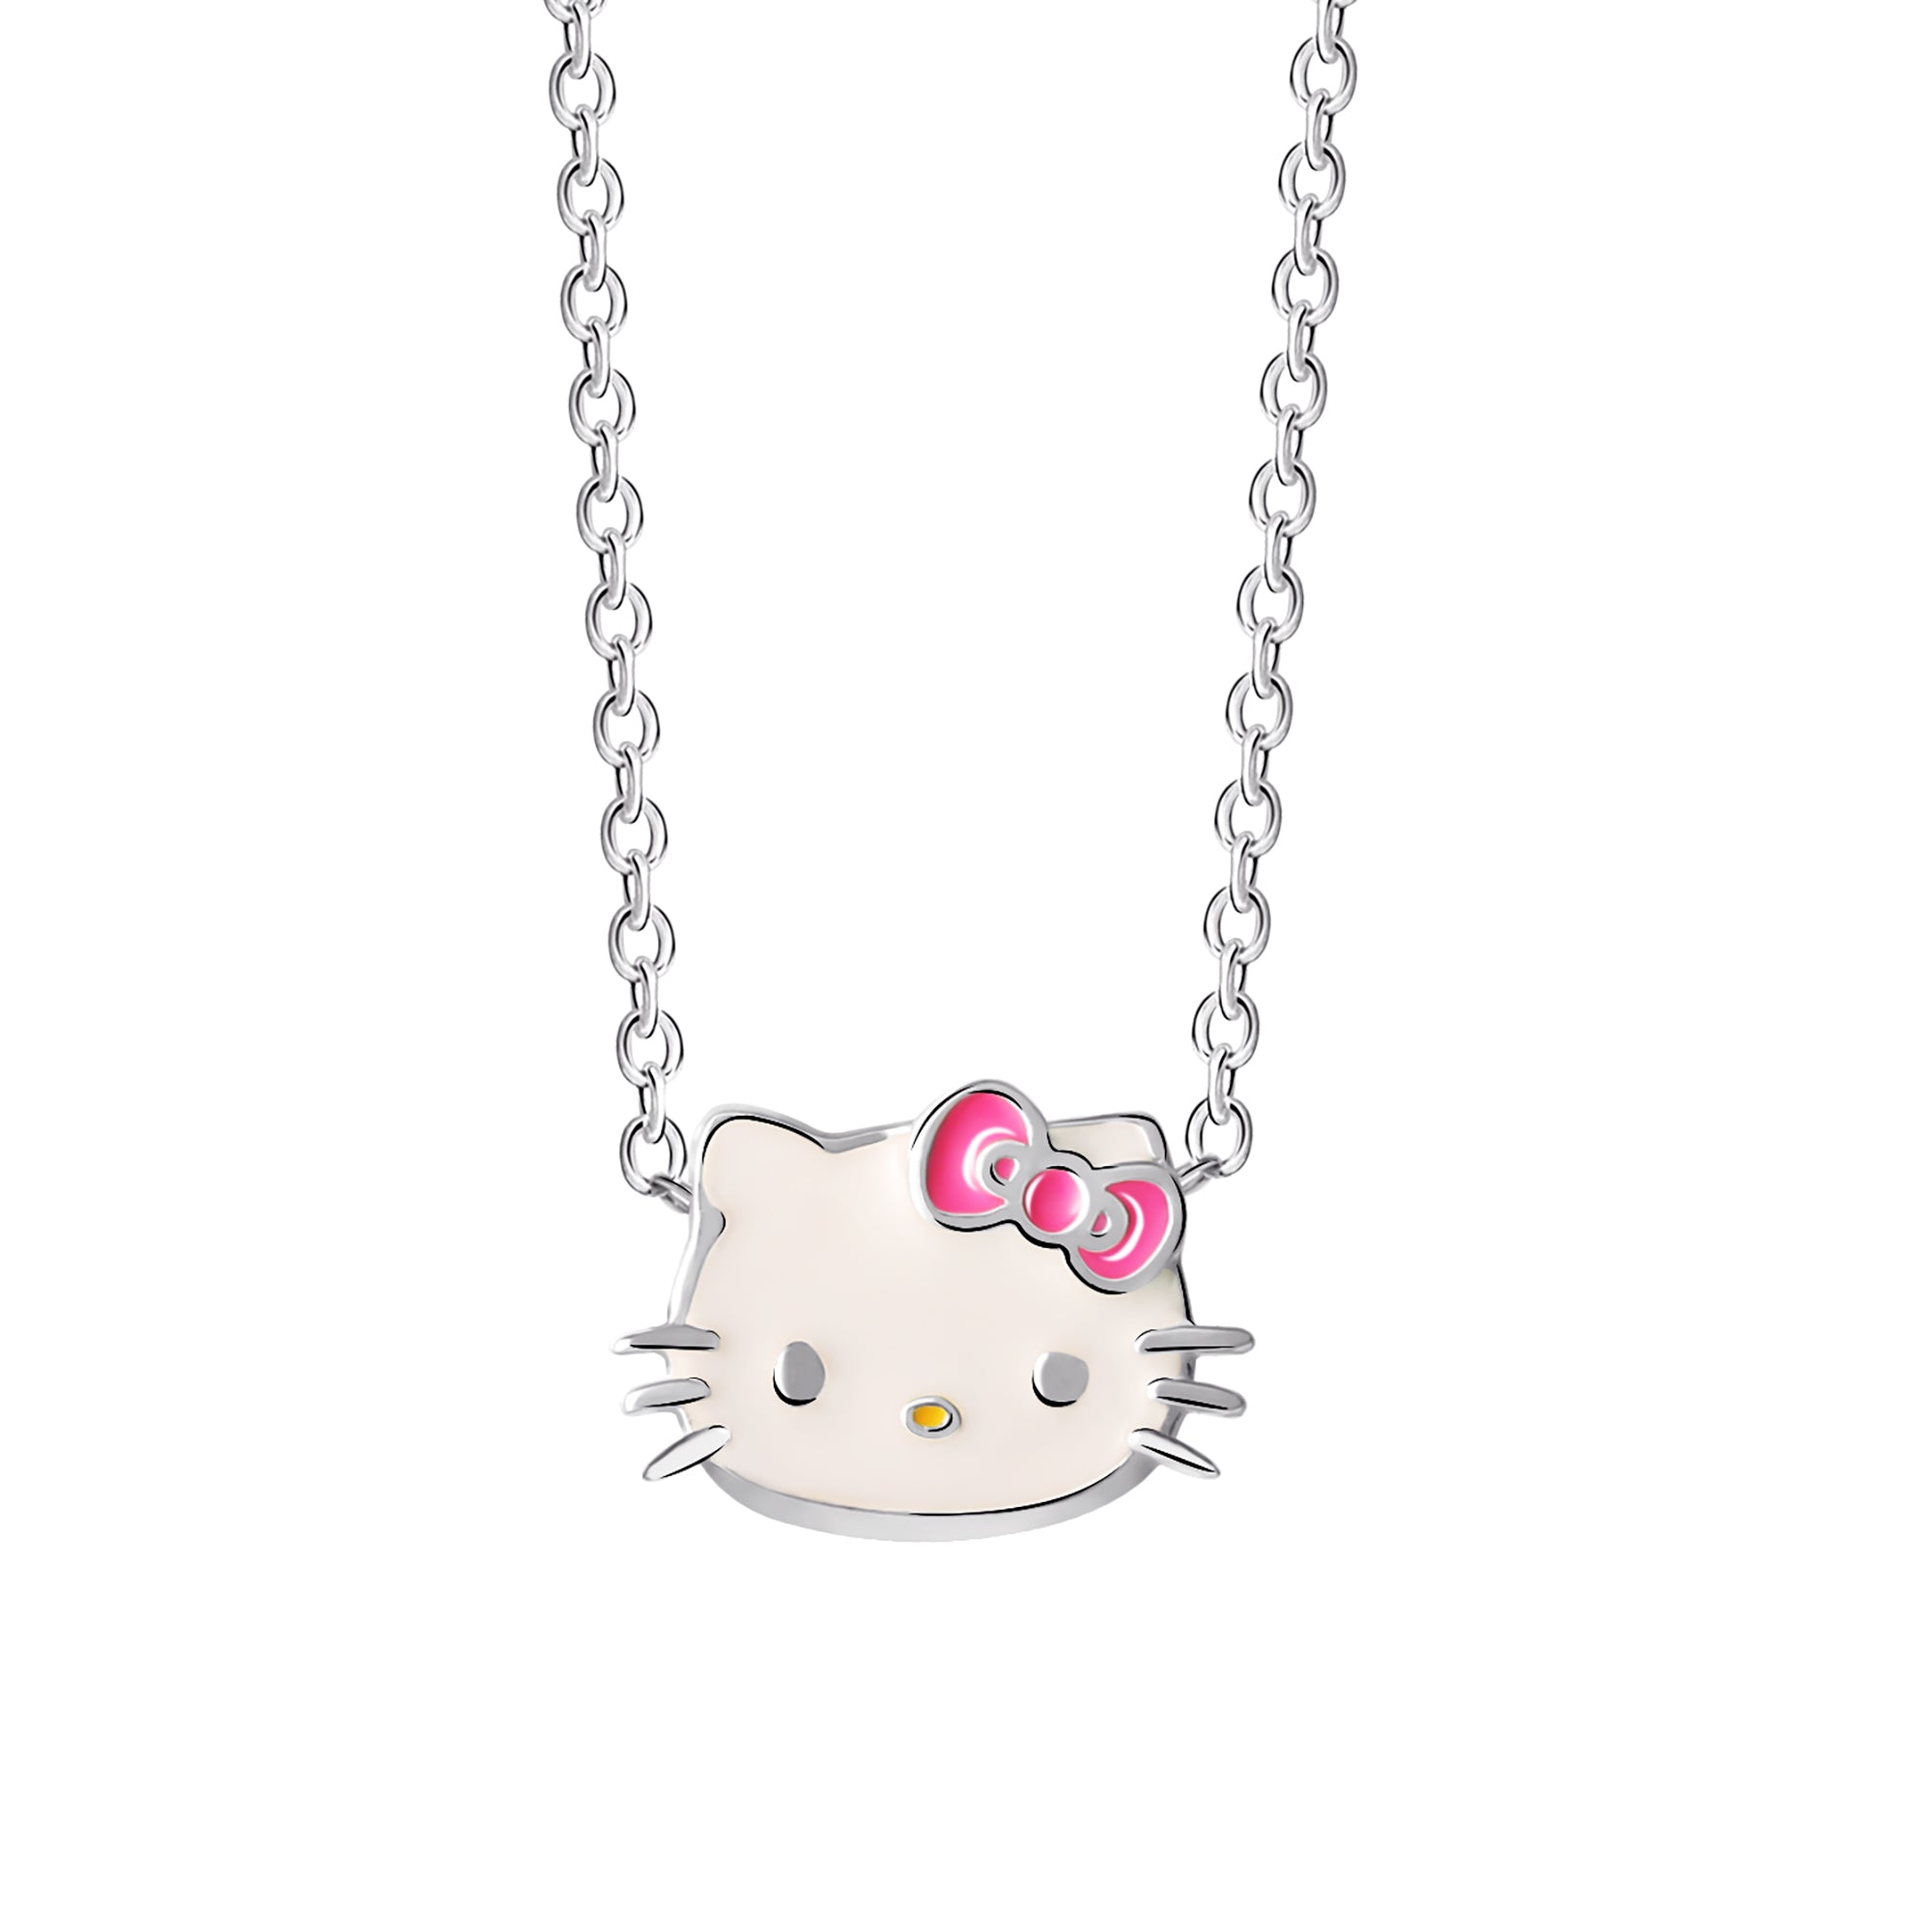 Sandro HELLO KITTY Child's Size 12 Charm Necklace CHAIN Link